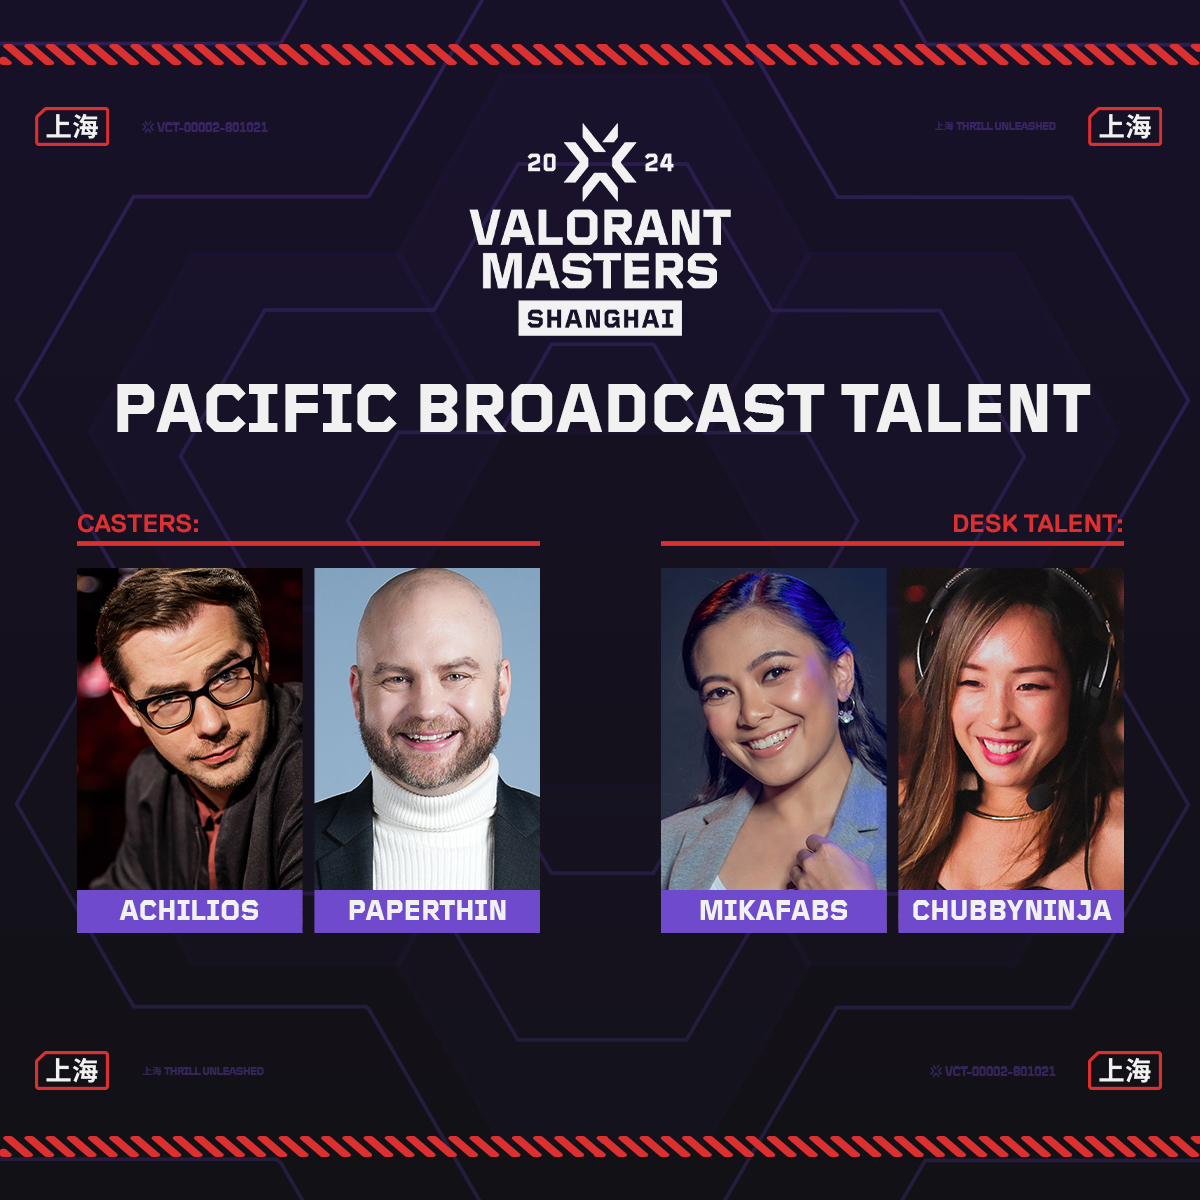 The Pacific broadcast talent buff at #VALORANTMasters Shanghai is going to be ↗️ #VCTPacific